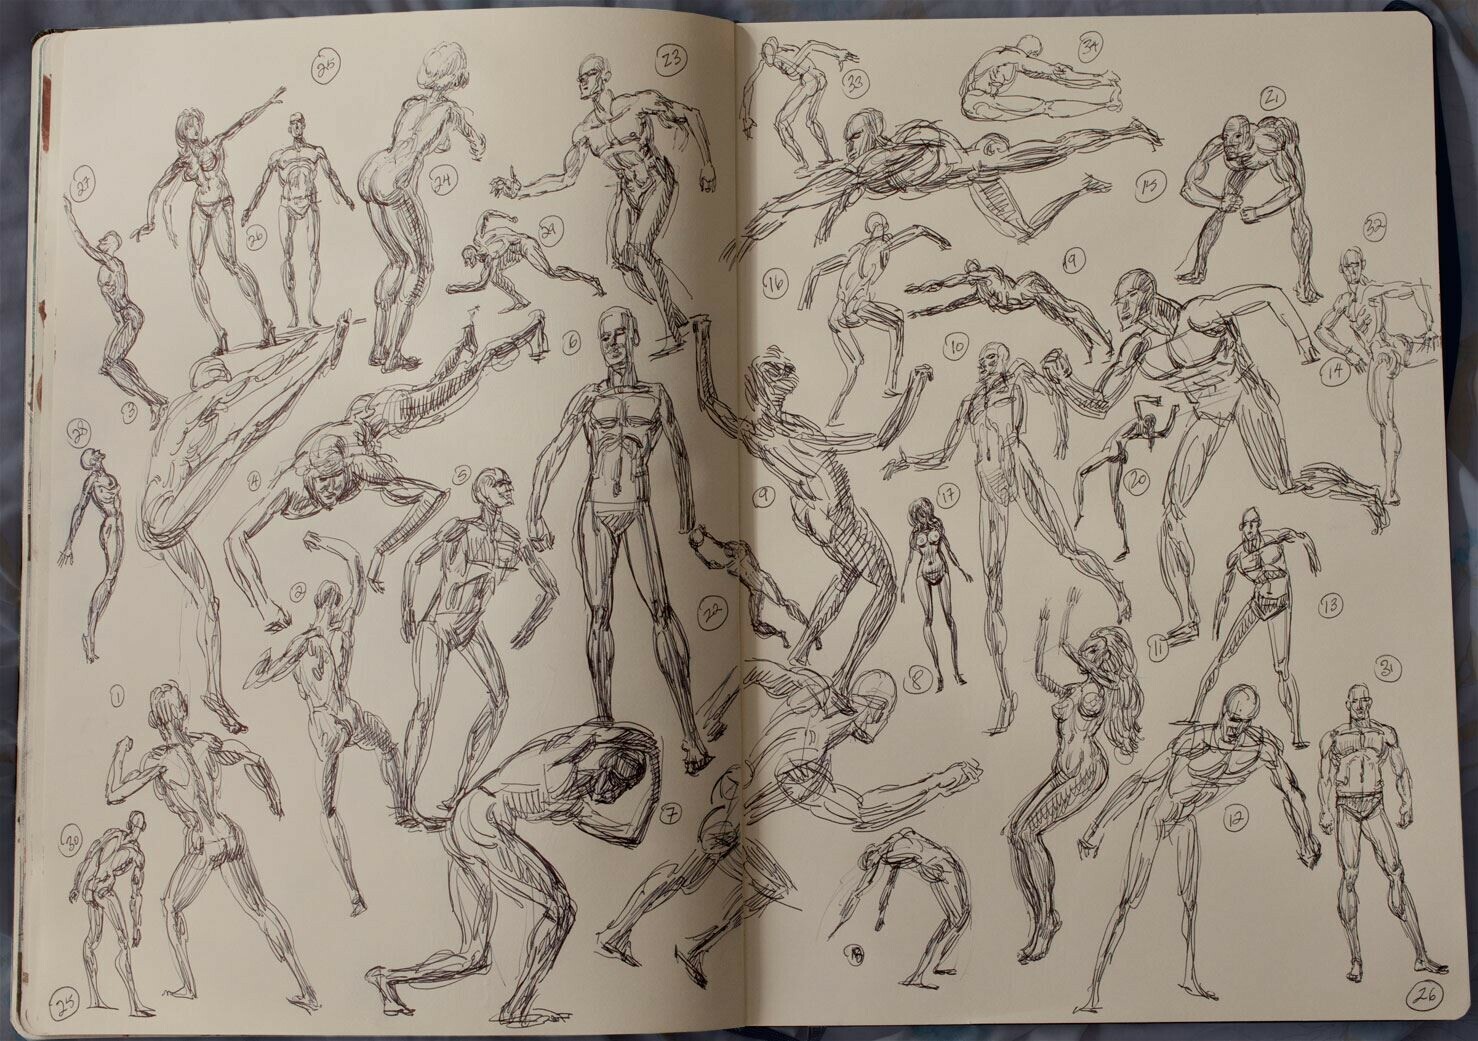 Keep a sketch book and draw manikin figures over and over, male and female, until drawing people is as free as hand writing.